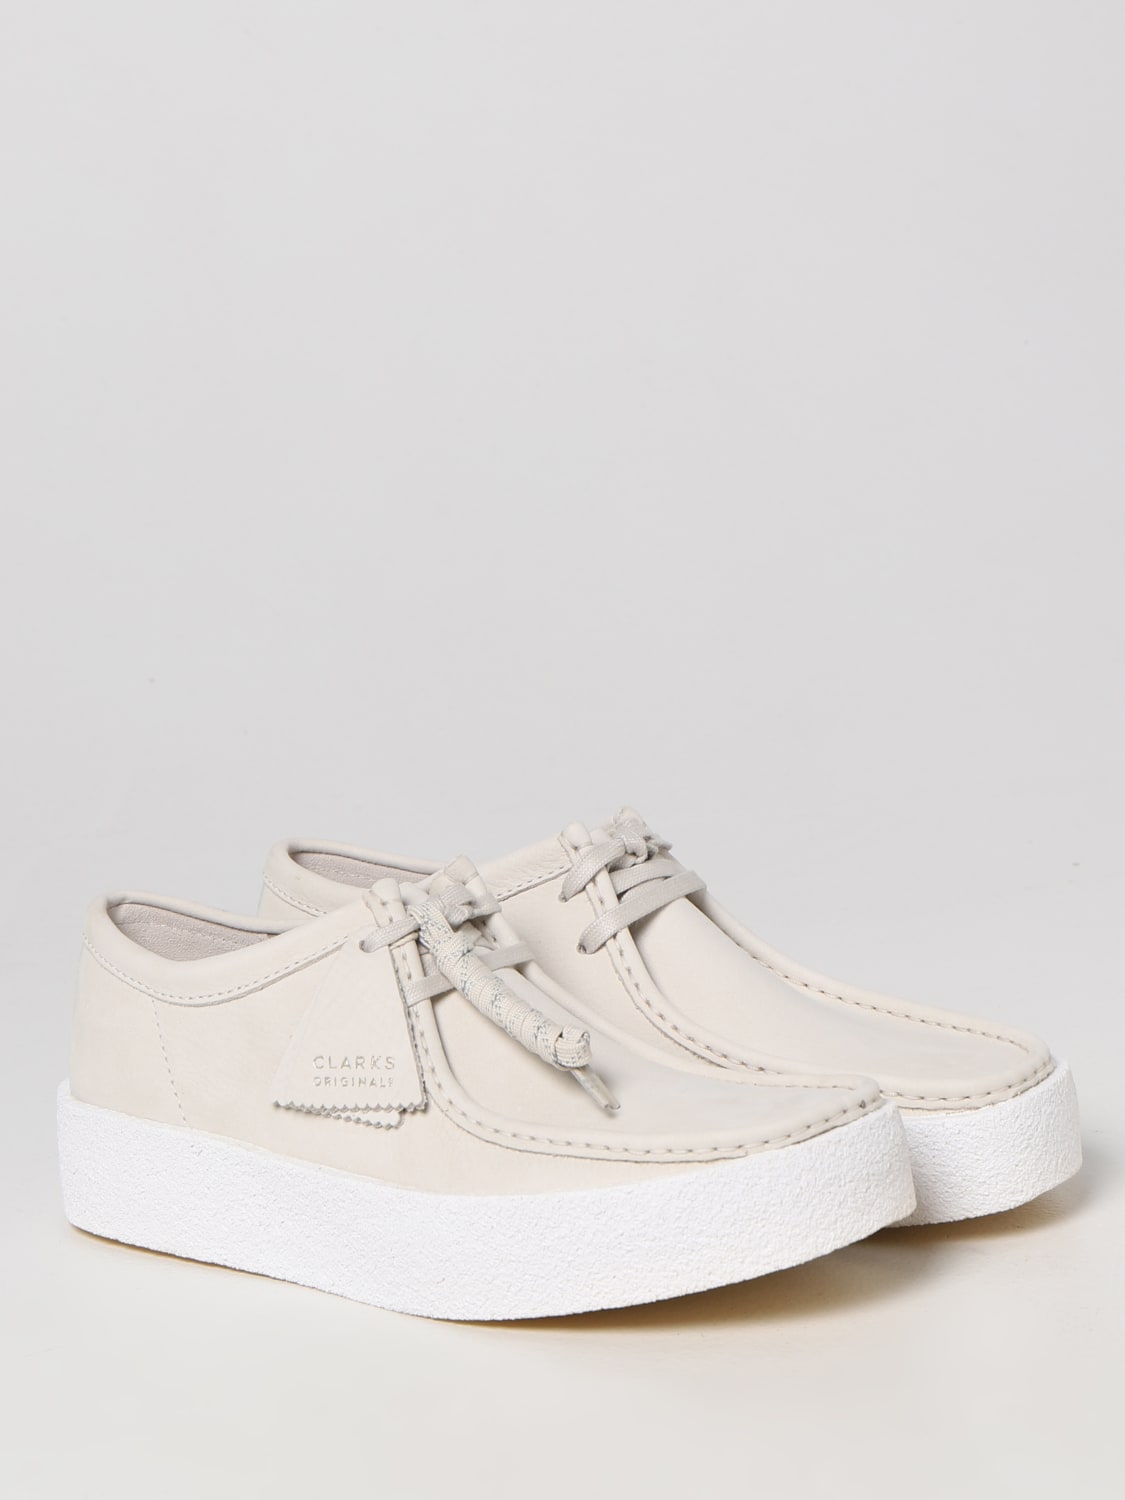 boots for man - White | Clarks Originals chukka boots 26158153 online on GIGLIO.COM